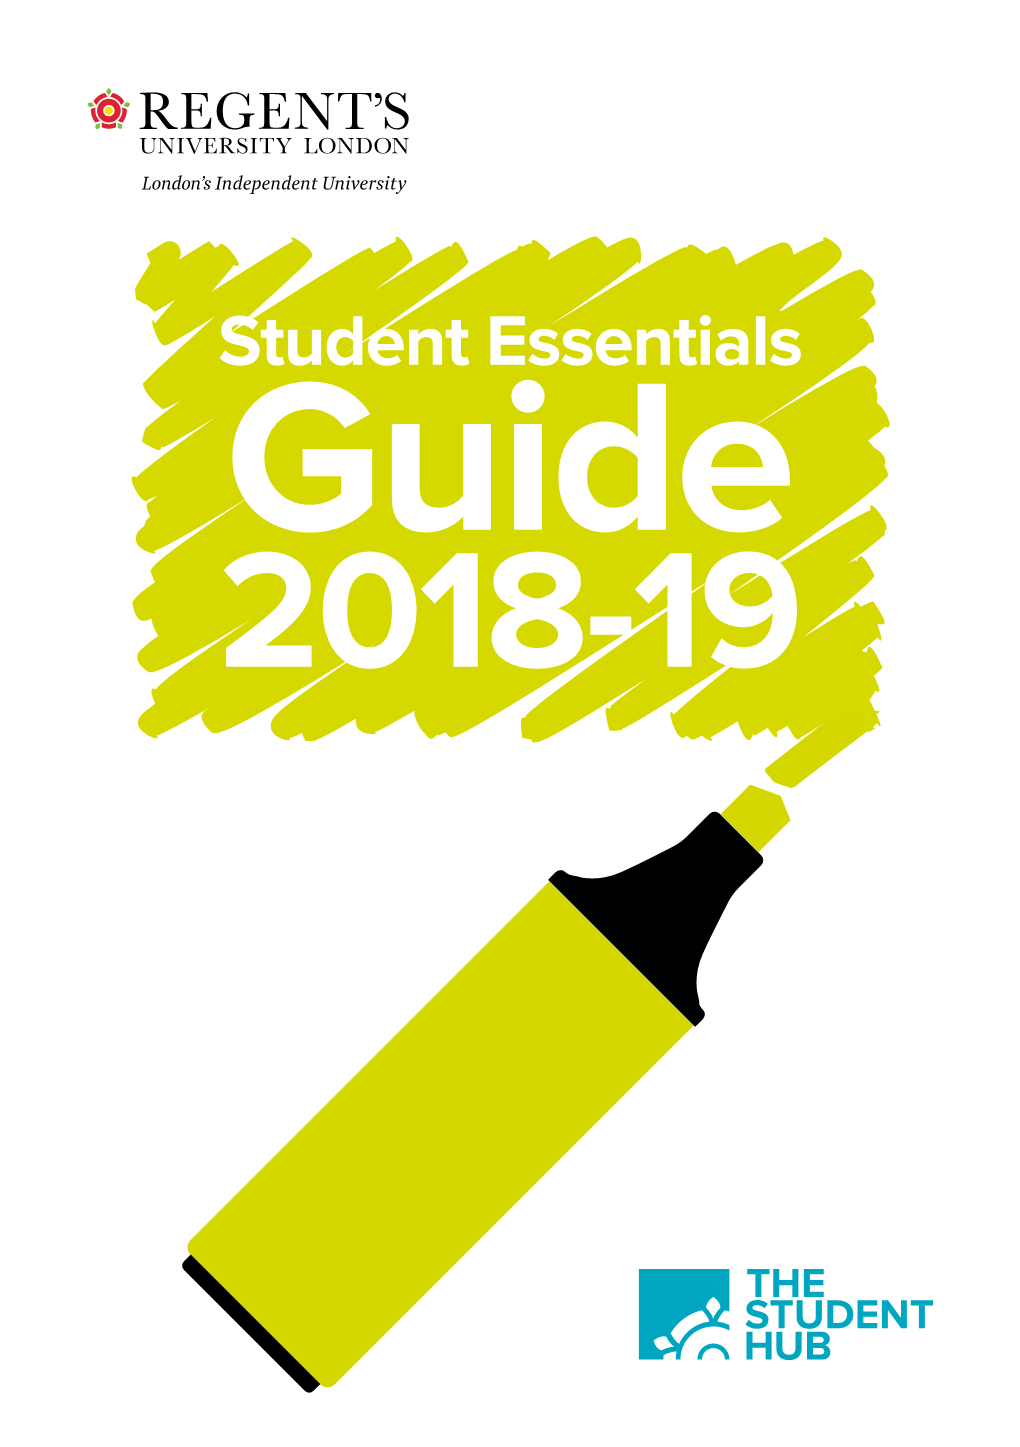 Student Essentials Guide 2018-19 Welcome